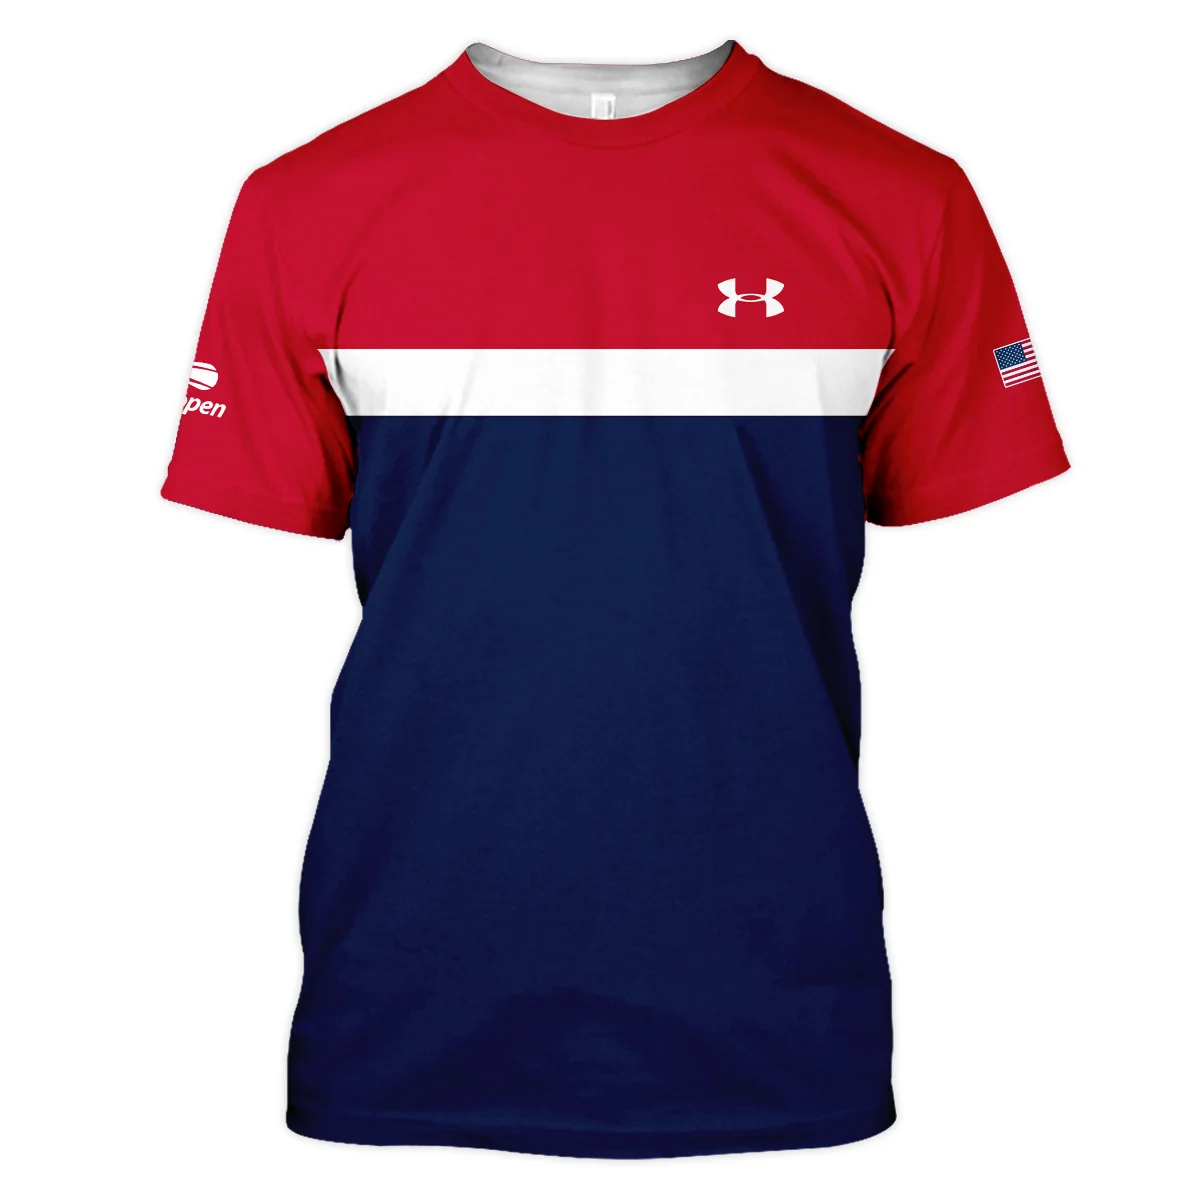 Under Armour Blue Red White Background US Open Tennis Champions Unisex T-Shirt Style Classic T-Shirt